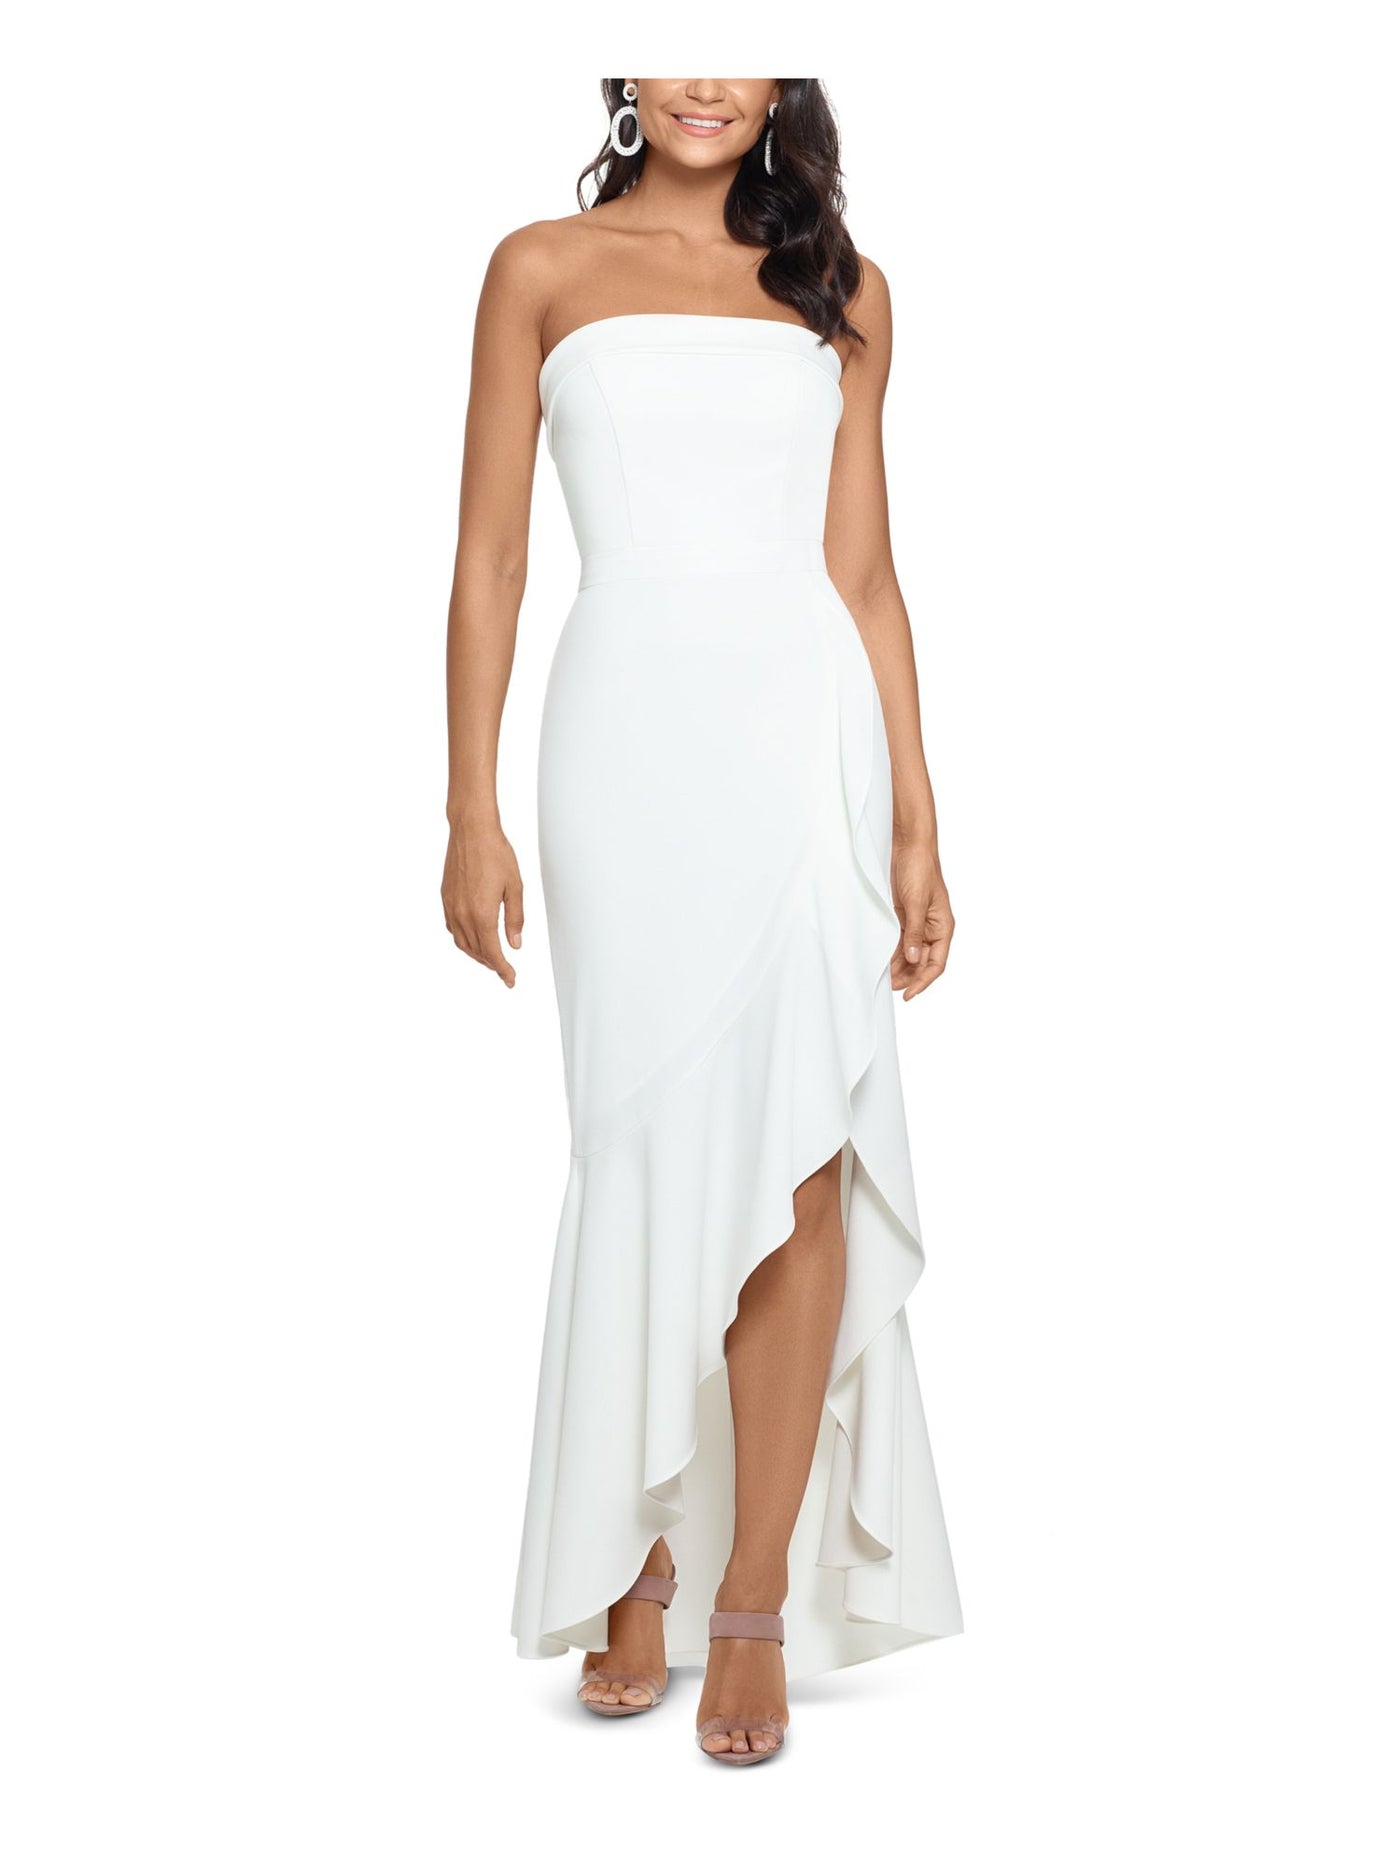 XSCAPE Womens Ivory Ruffled Strapless Above The Knee Evening Hi-Lo Dress 12